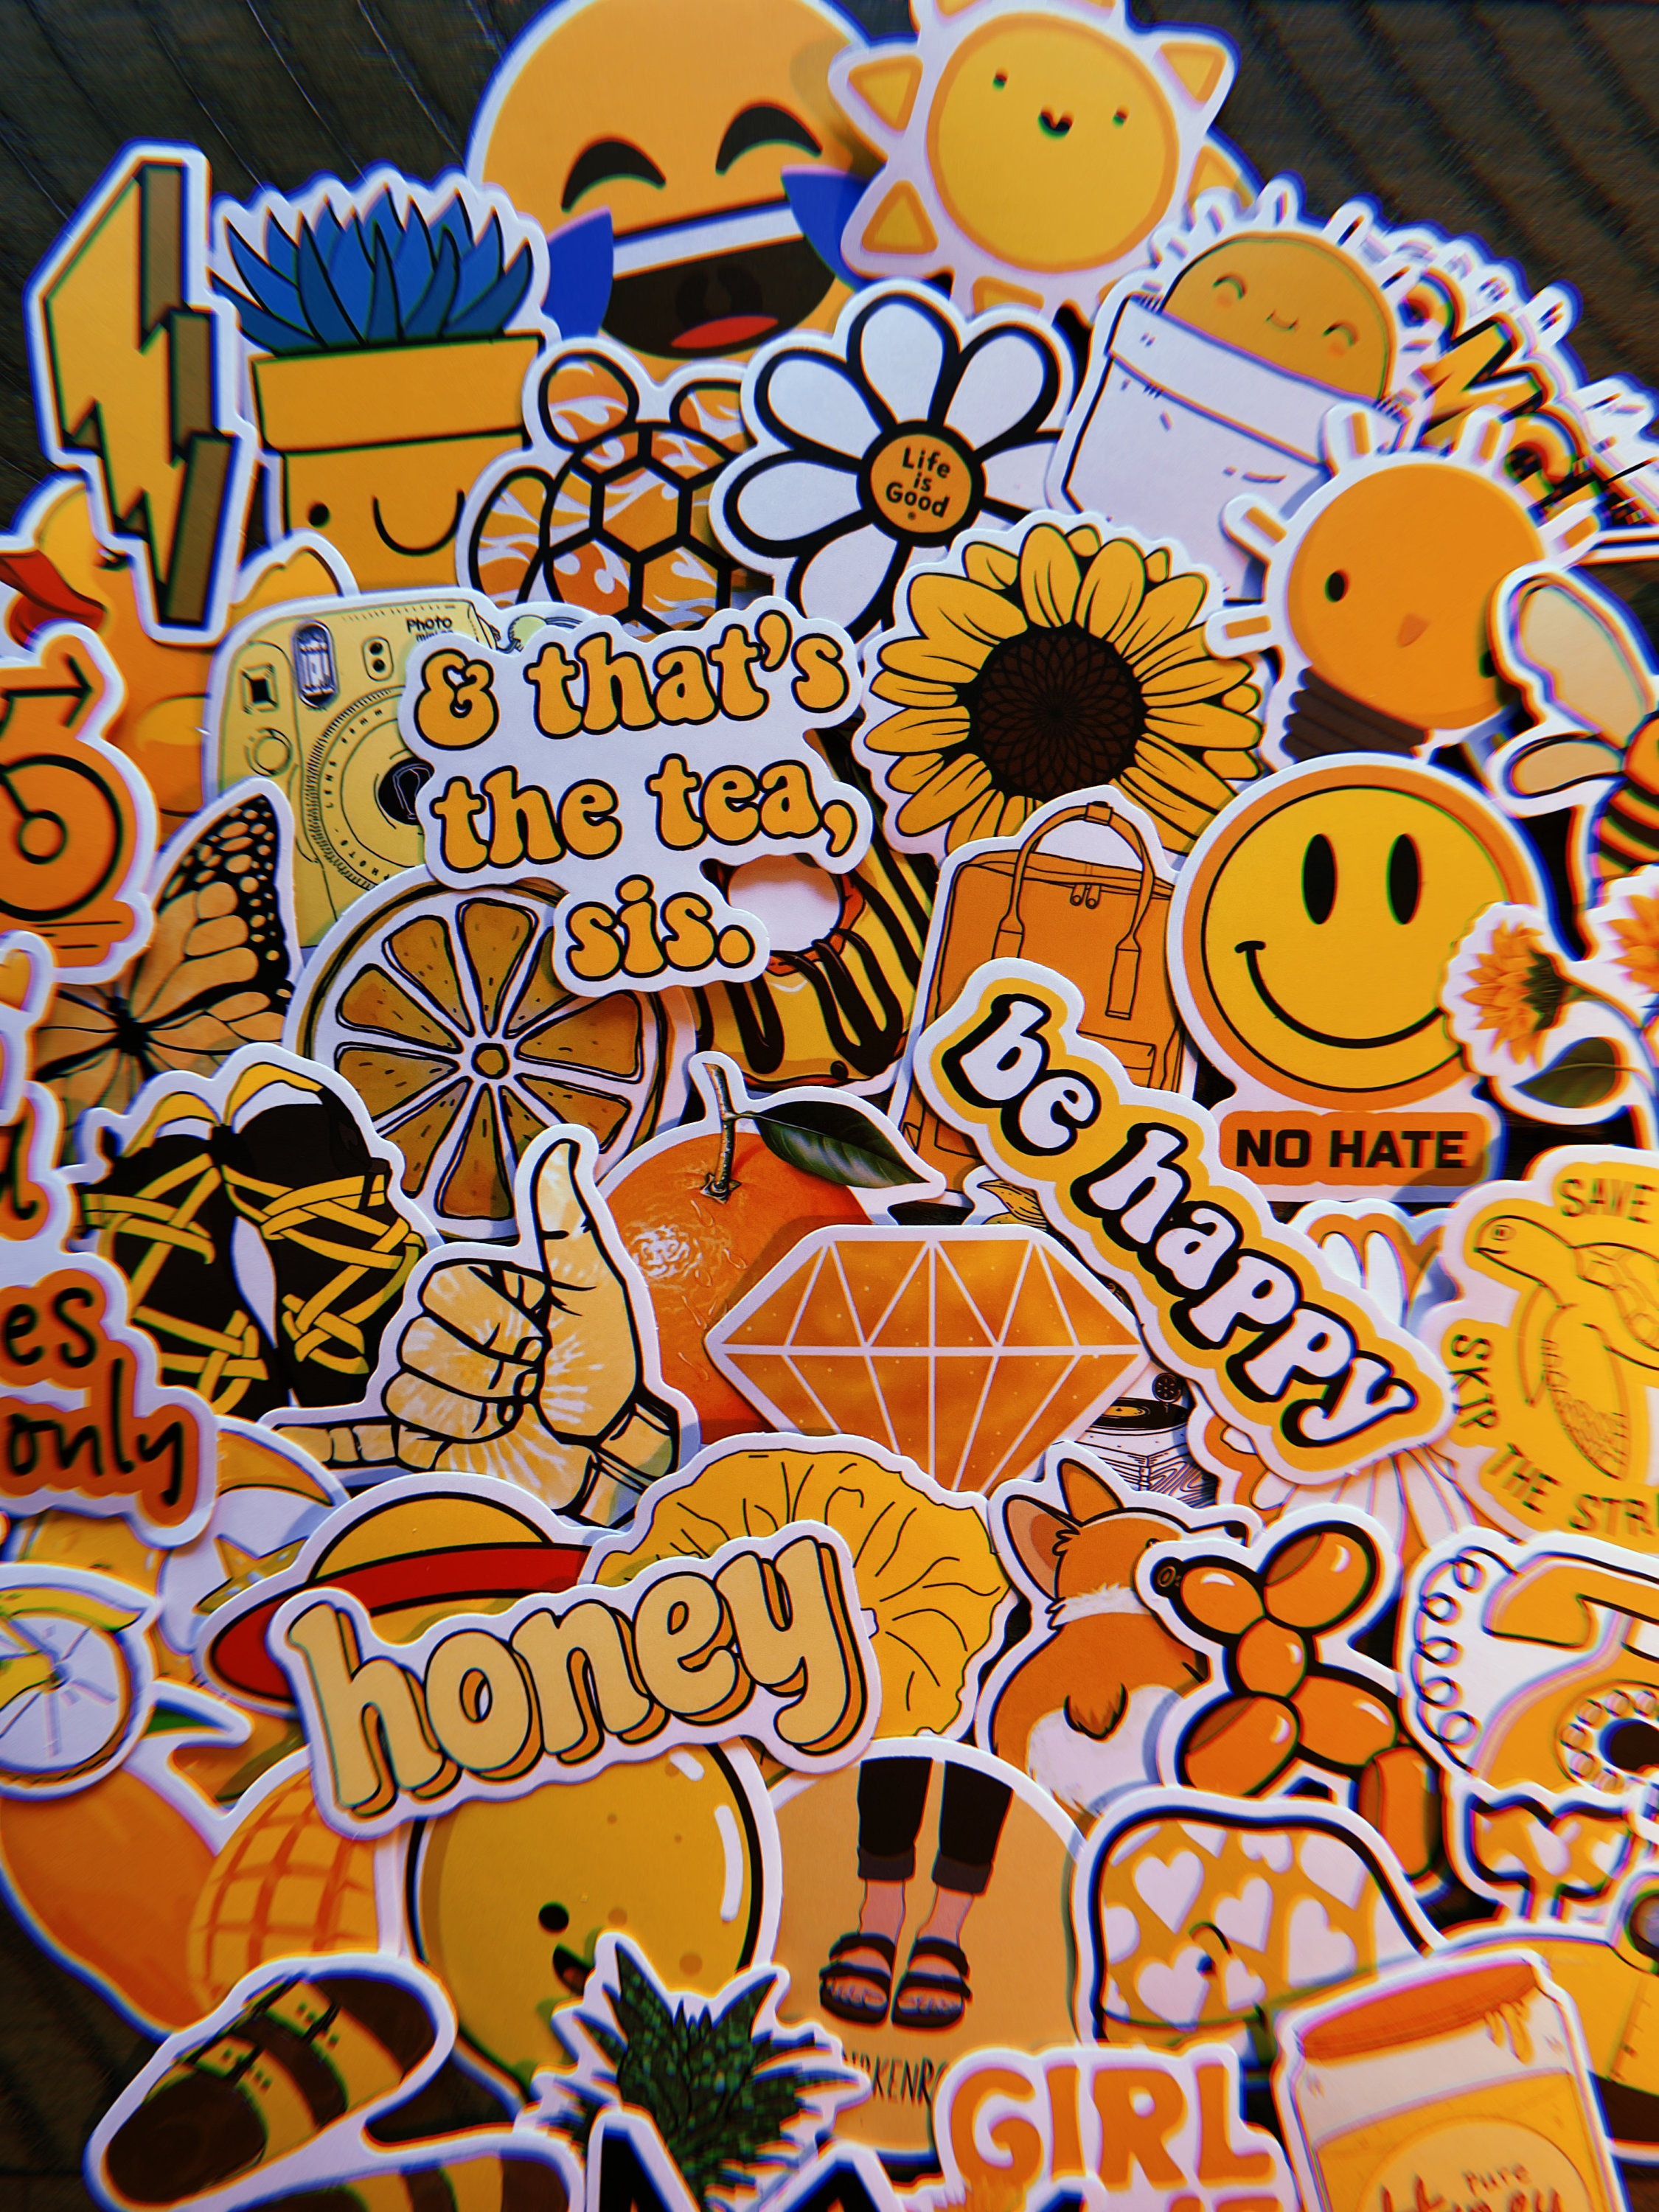 Animated Preppy Stickers on Yellow Images Creative Store